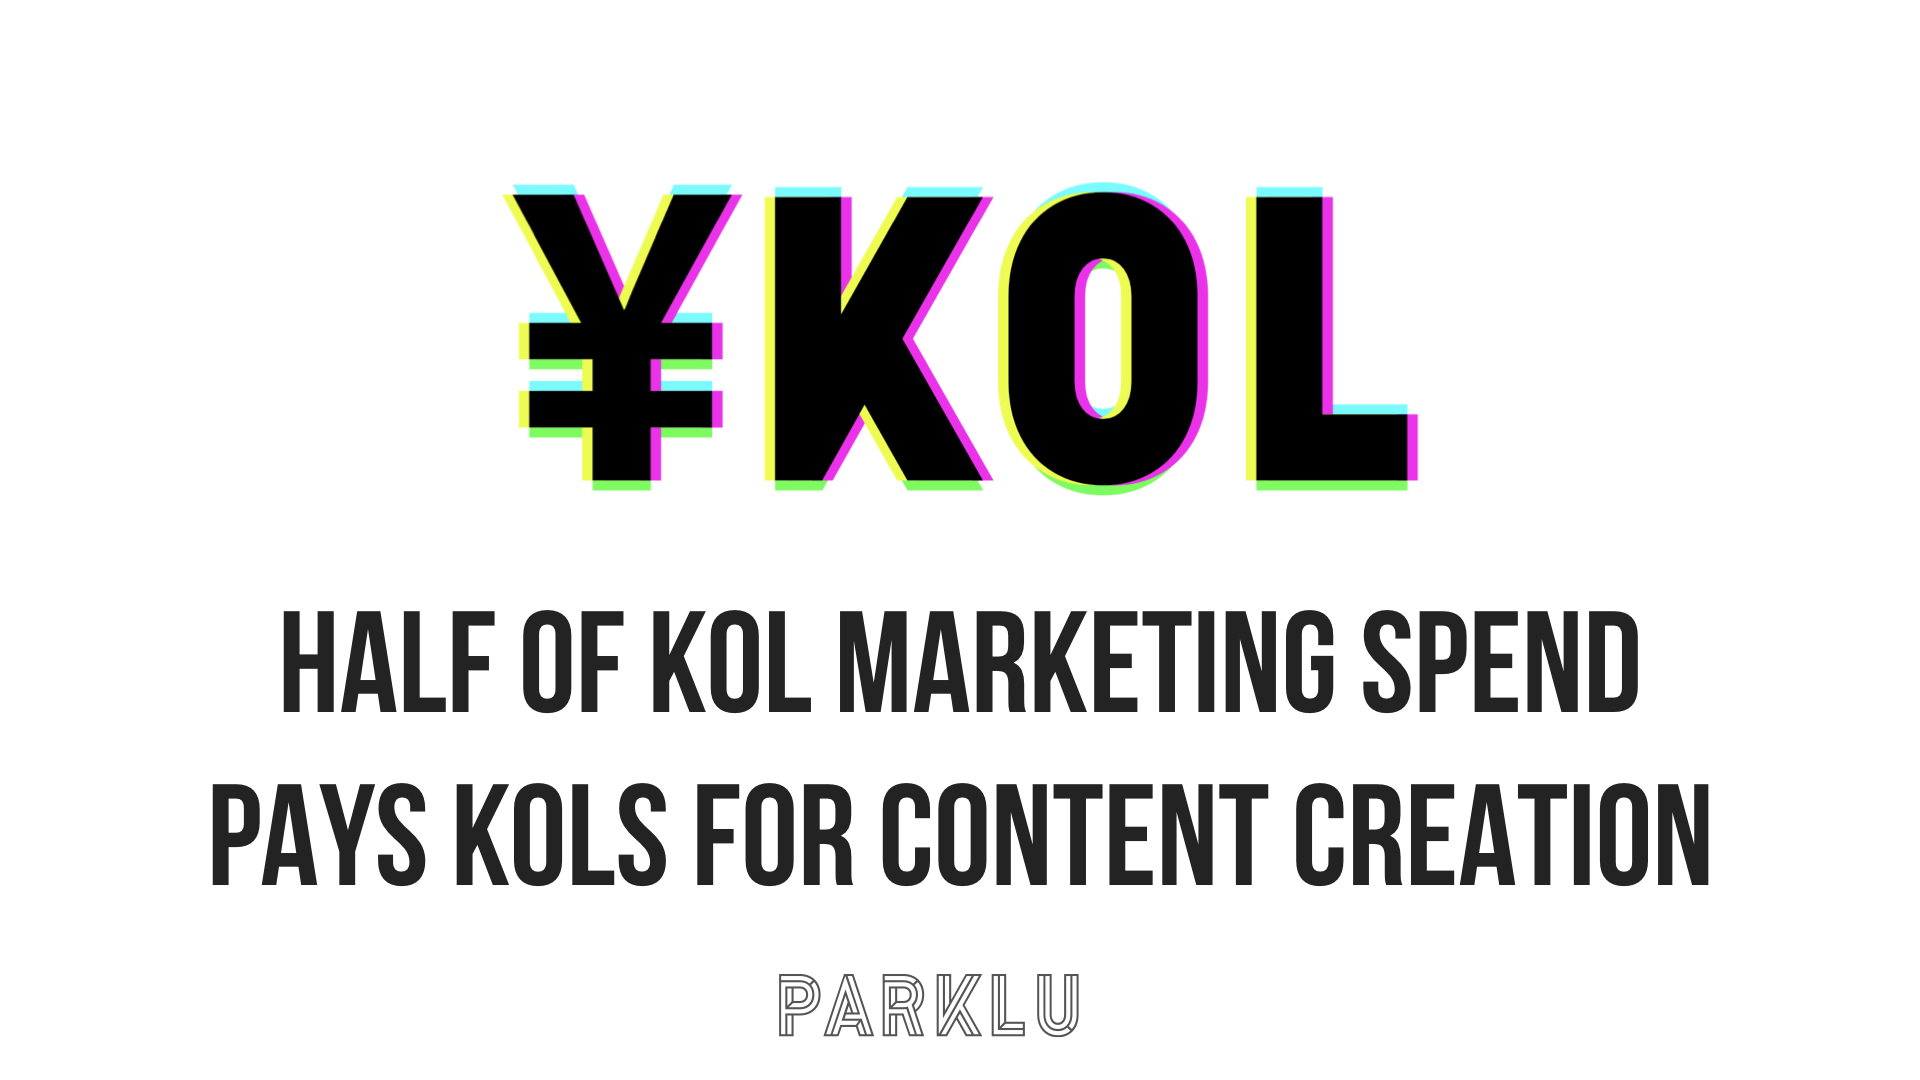 Half of KOL Marketing spend goes to content production